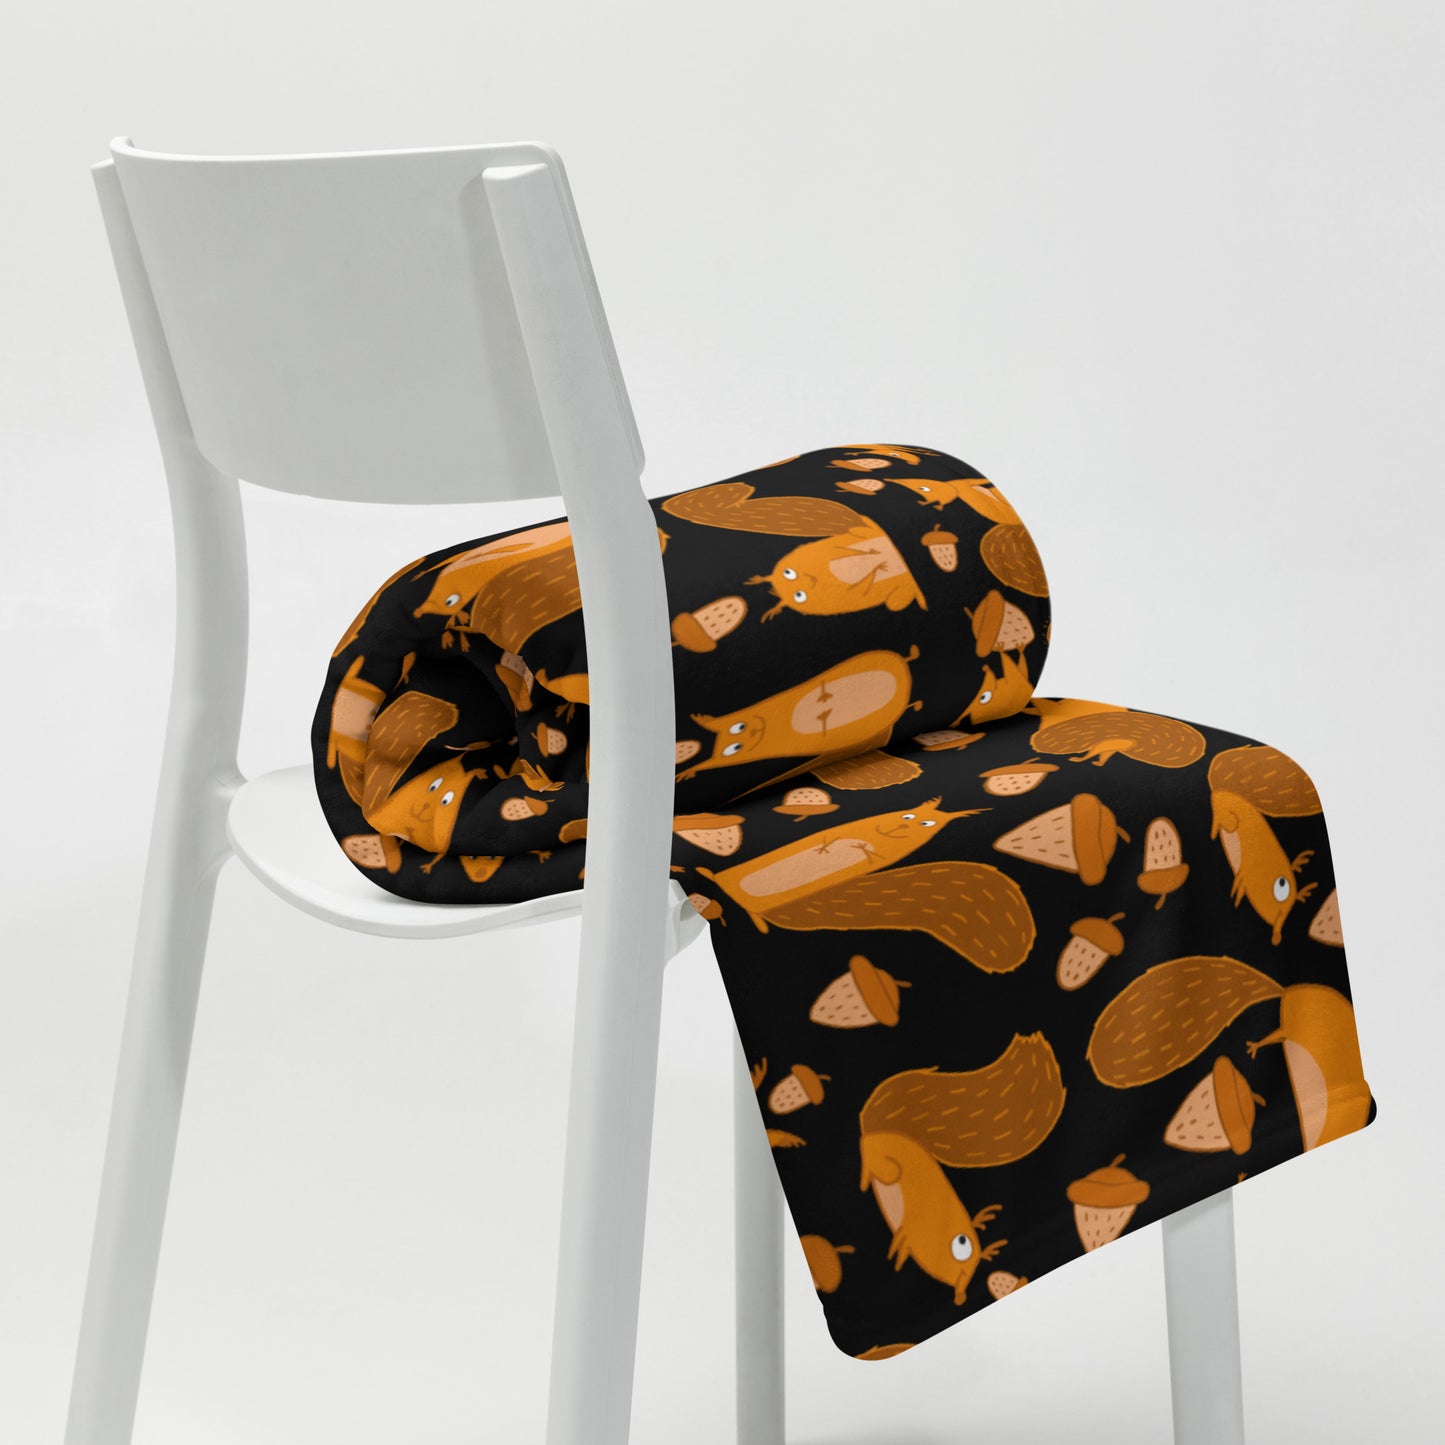 Throw blanket black color with funny orange squirrels and nuts on chair